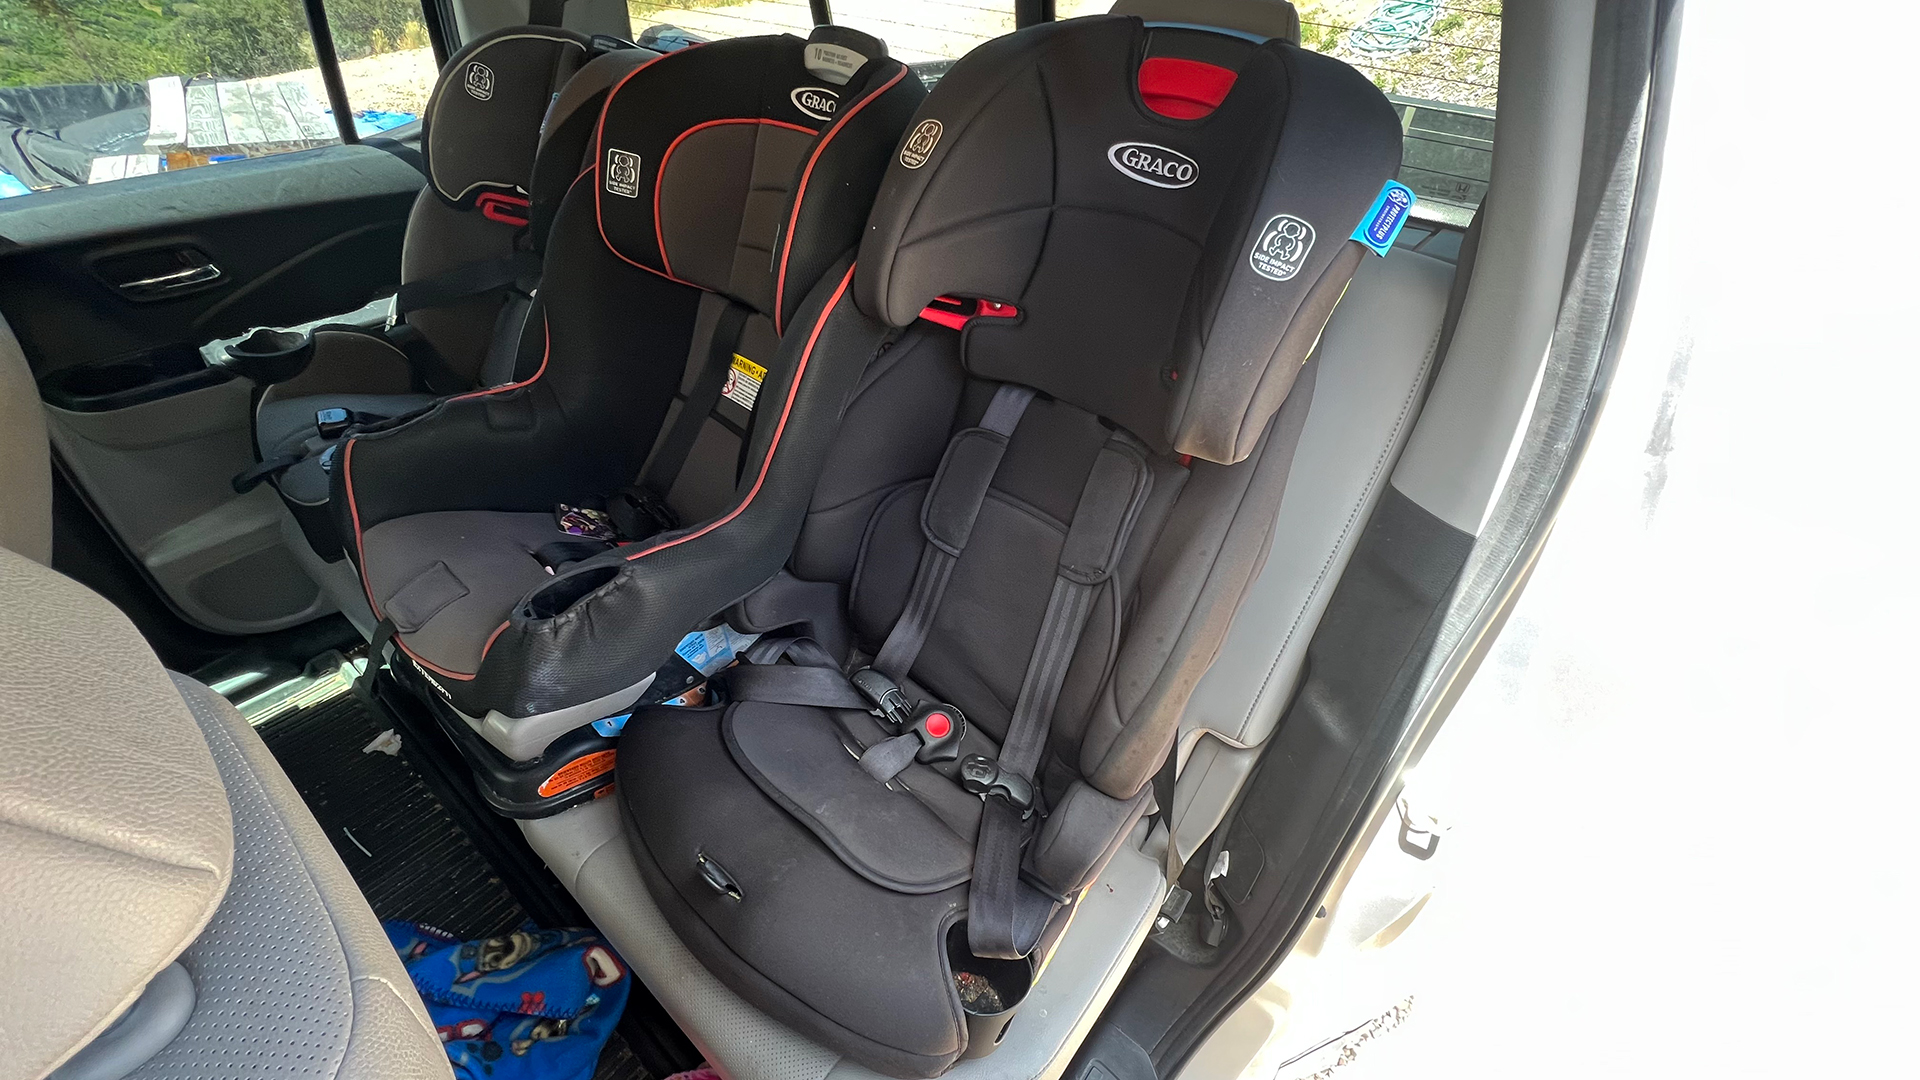 Best Booster Seats (Review & Buying Guide) in 2023